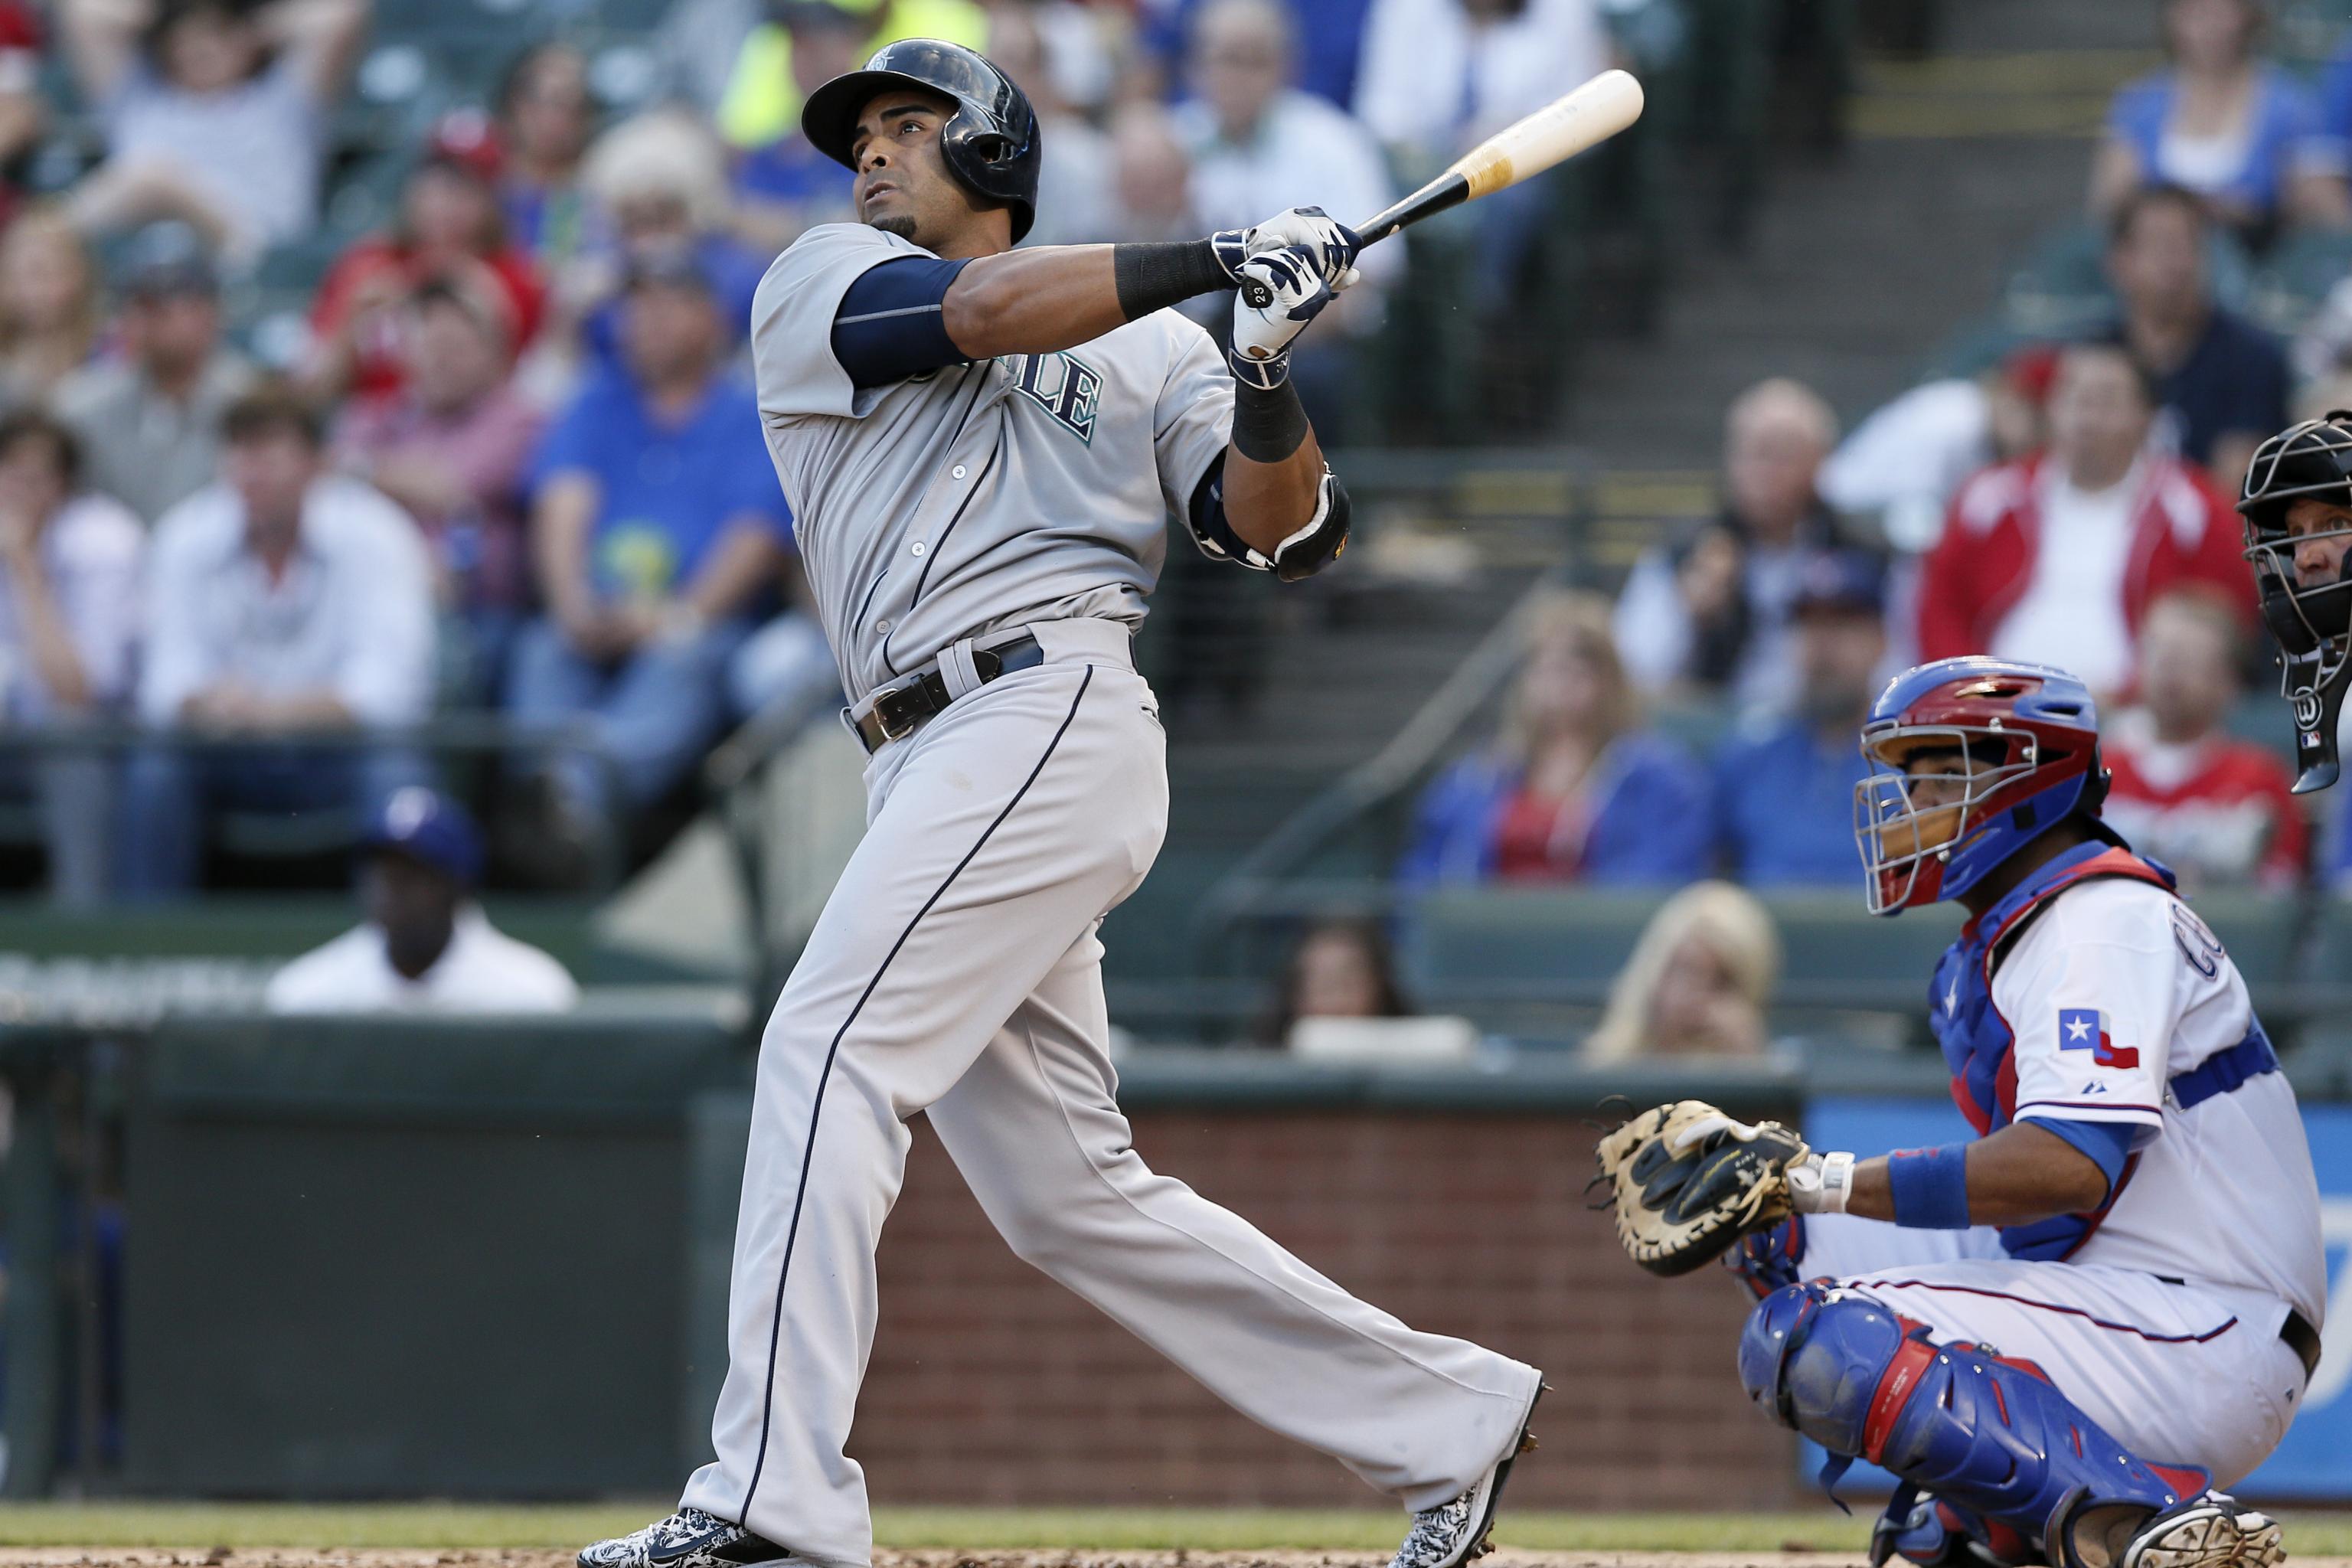 Mariners Sign Nelson Cruz: Let's Watch Him Hit Home Runs